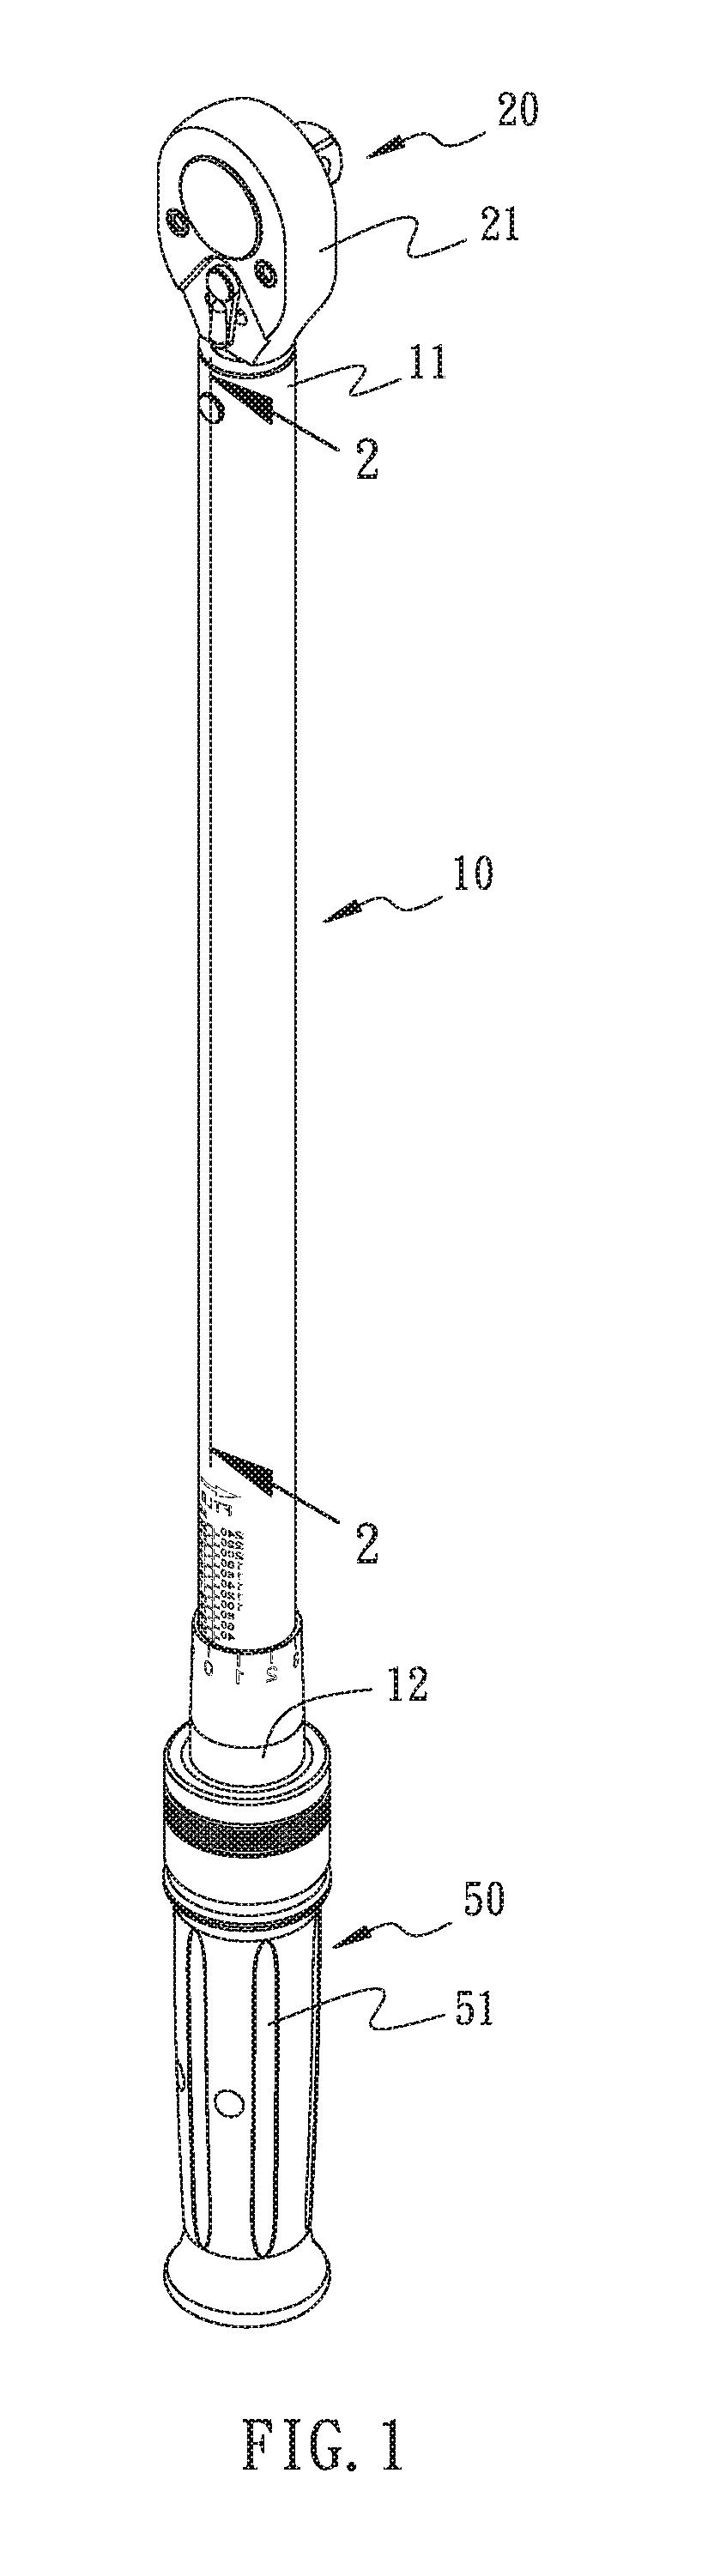 Torque wrench structure